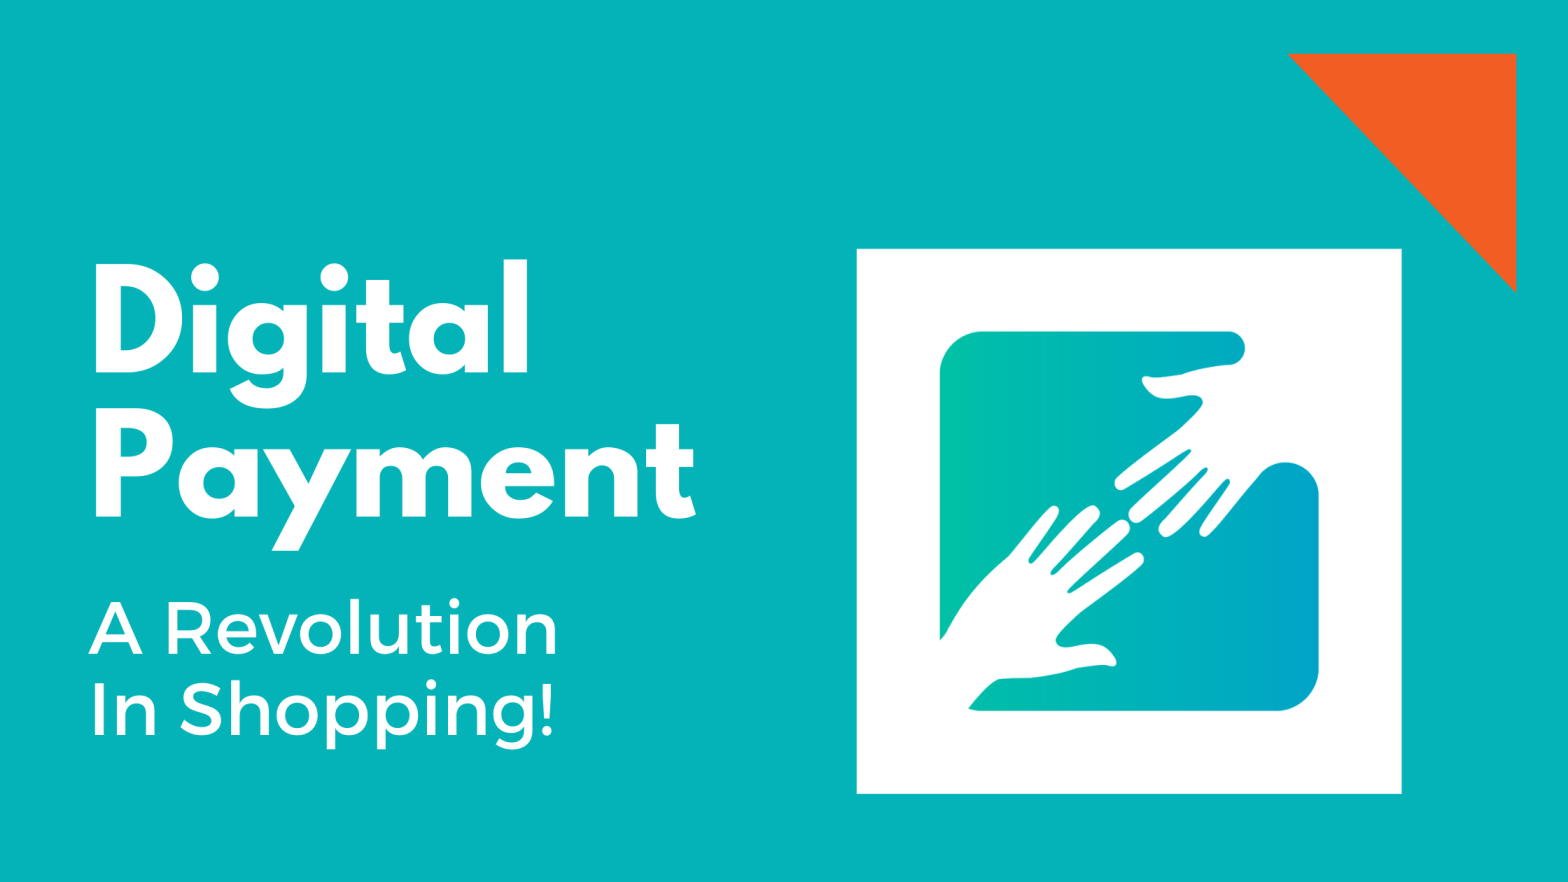 Digital Payment A Revolution In Shopping!